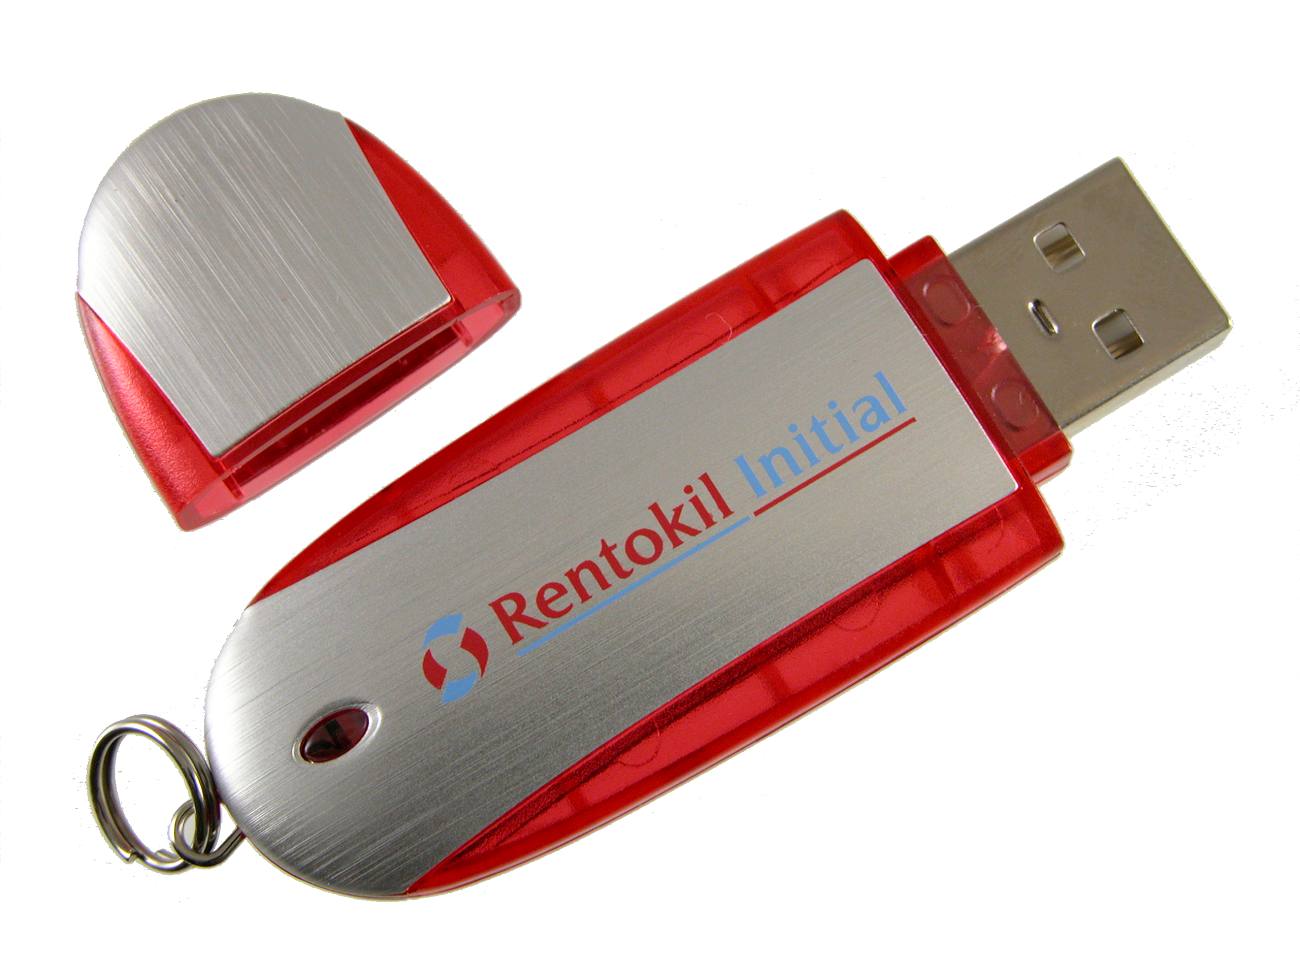 Personalised Usb Stick Red Plastic With Metal Shell Cd274